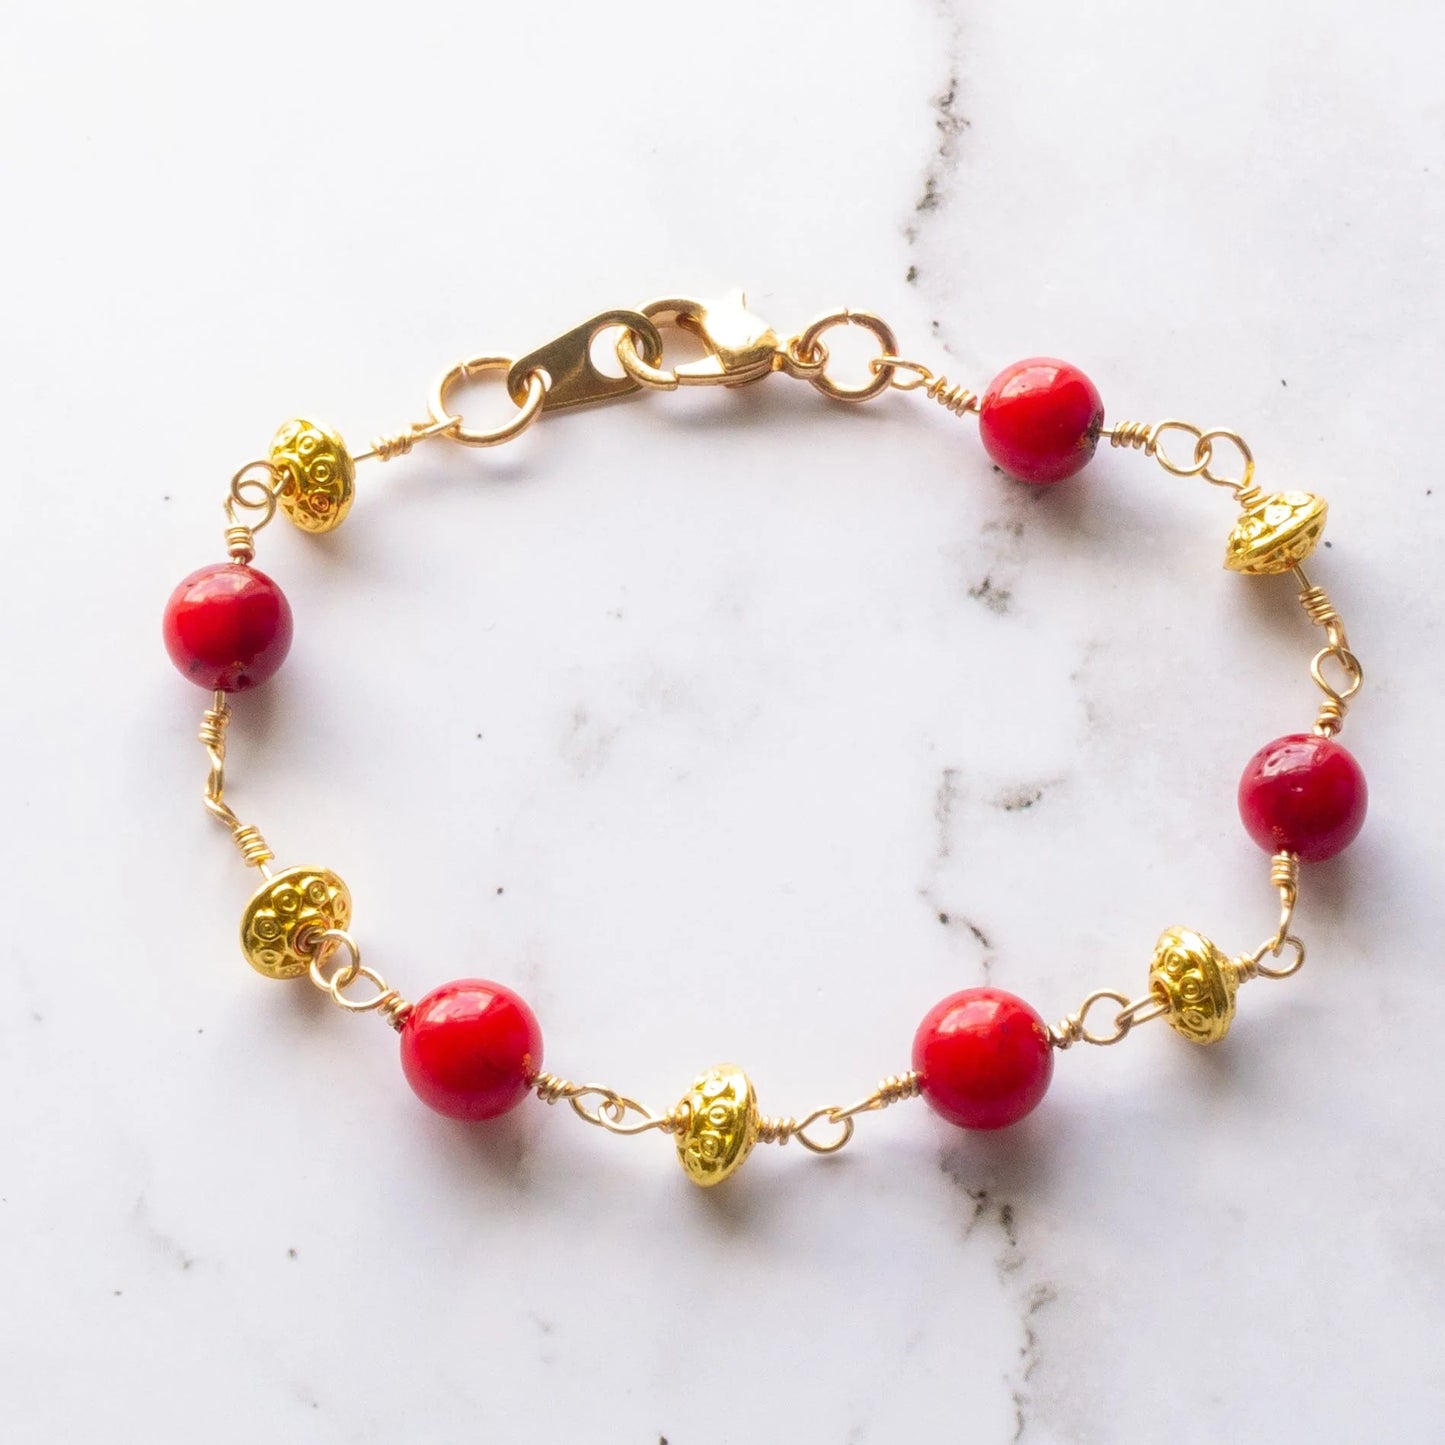 Cheekoo's Red Coral Bead Blessing Fortune Bracelet (Choose from 4 sizes)